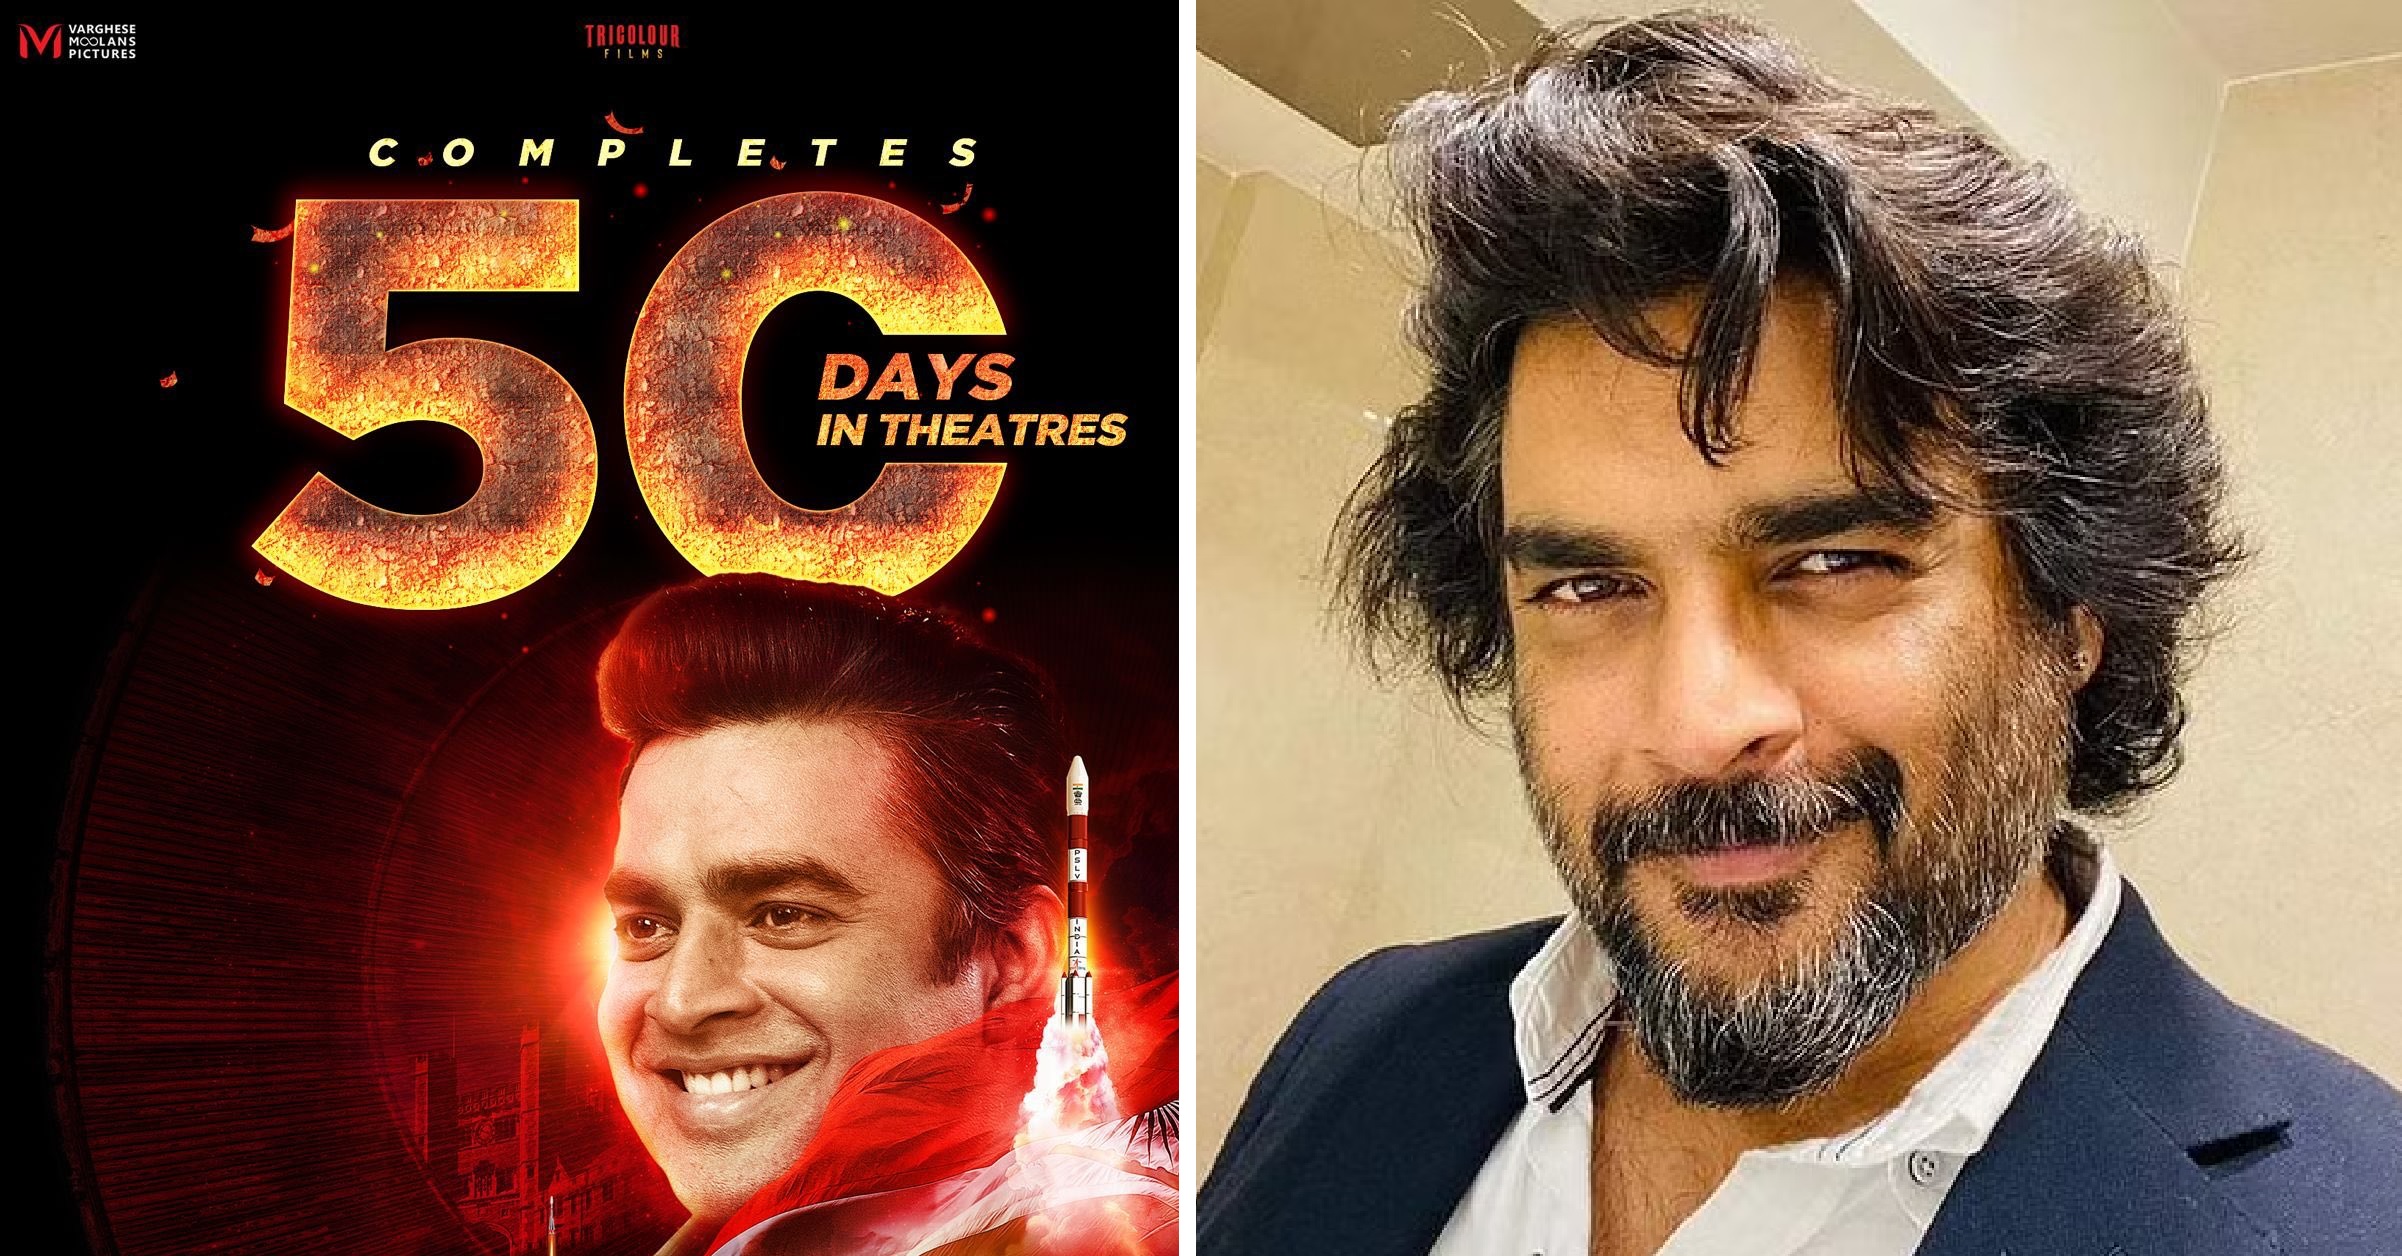 R Madhavan’s Movie Rocketery Completes 50 Days In Theatres While Other Bollywood Movies Struggle To Survive